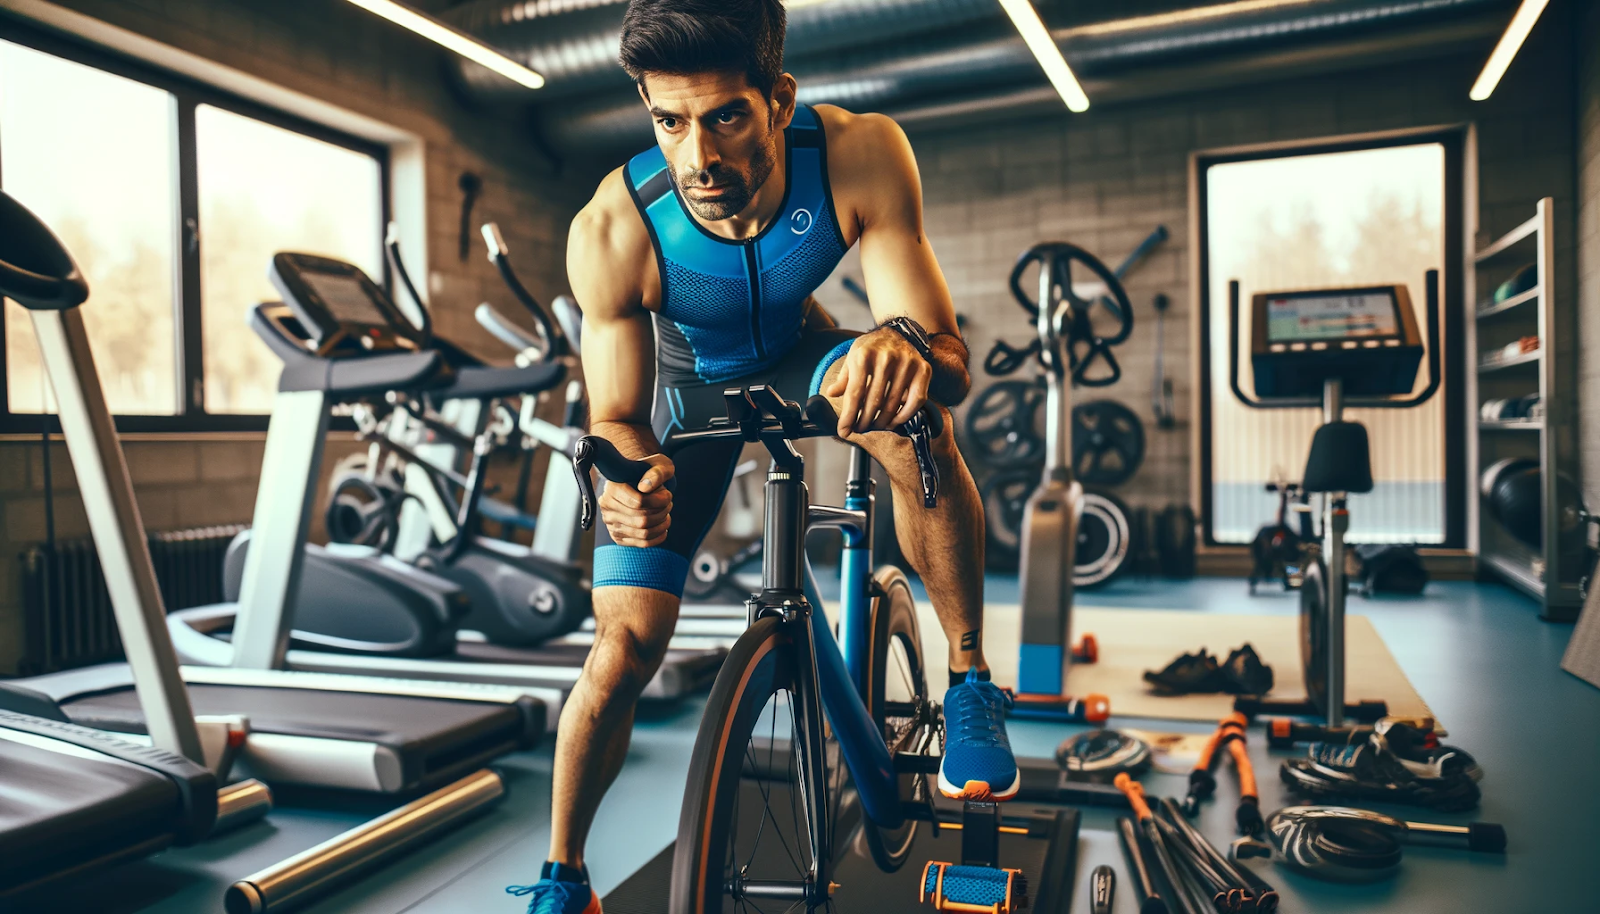 he is transitioning between a stationary bike and a running treadmill, illustrating the unique aspect of a brick workout. He's dressed in a bright blue triathlon suit, and his expression is one of determination and focus.